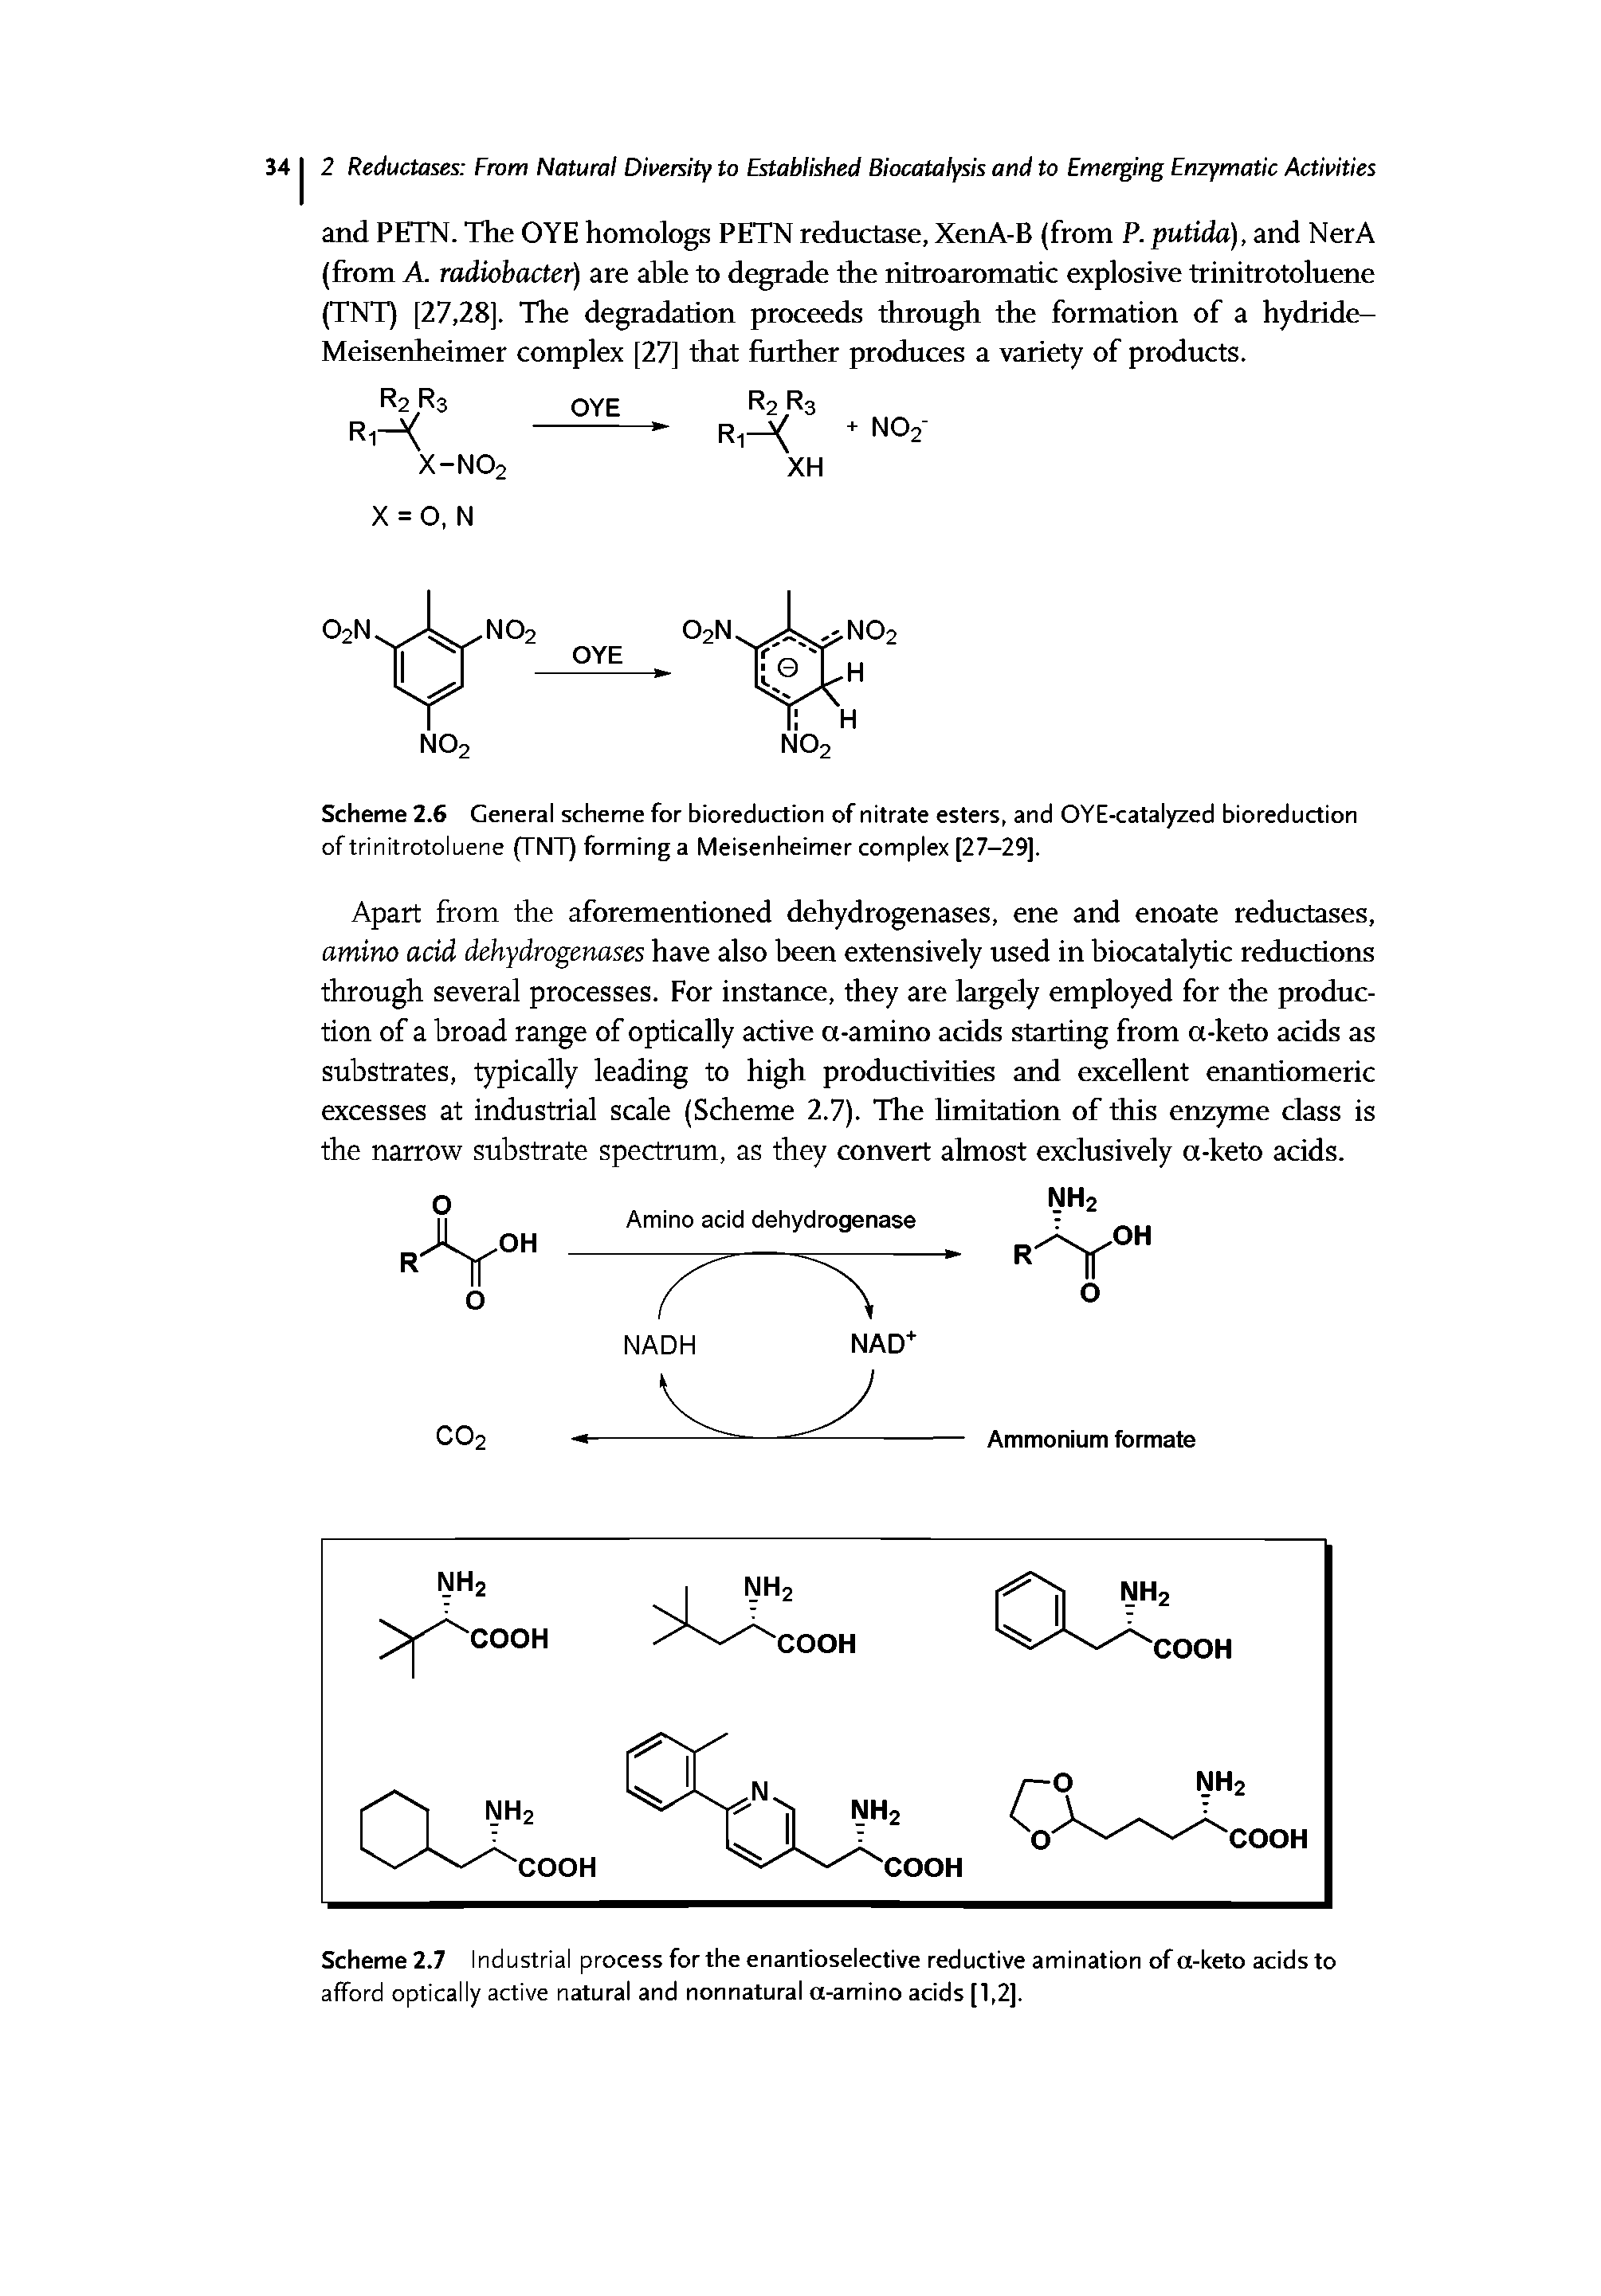 Scheme 2.7 Industrial process for the enantioselective reductive amination of a-keto acids to afford optically active natural and nonnatural a-amino acids [1,2].